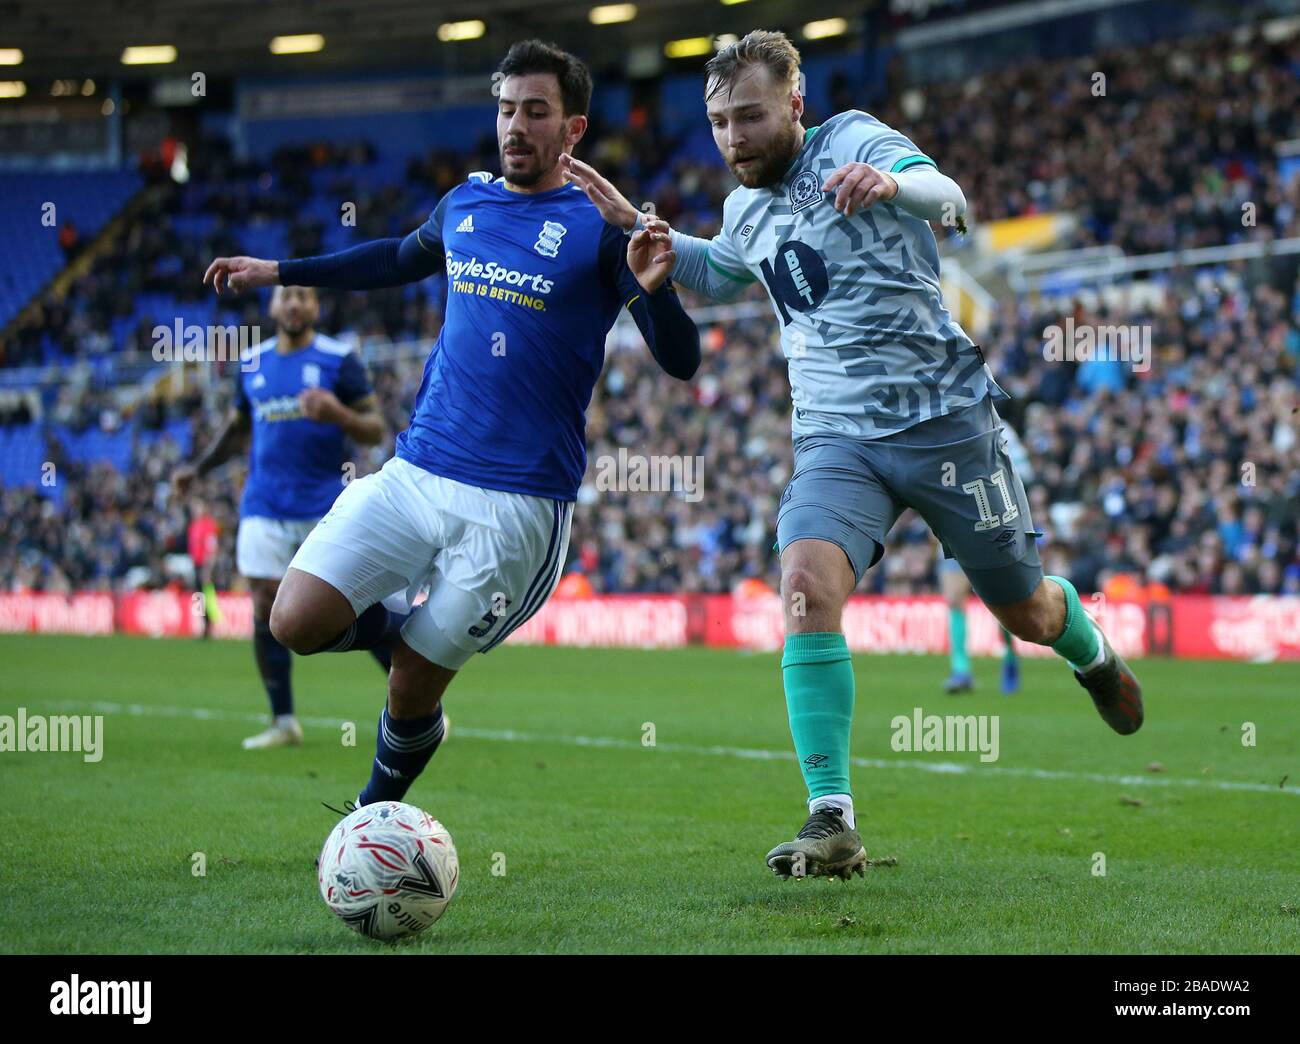 Birmingham City's Maxime Colin and Blackburn Rovers' Harry Chapman during the FA Cup Third Round match at St Andrew's Trillion Trophy Stadium Stock Photo